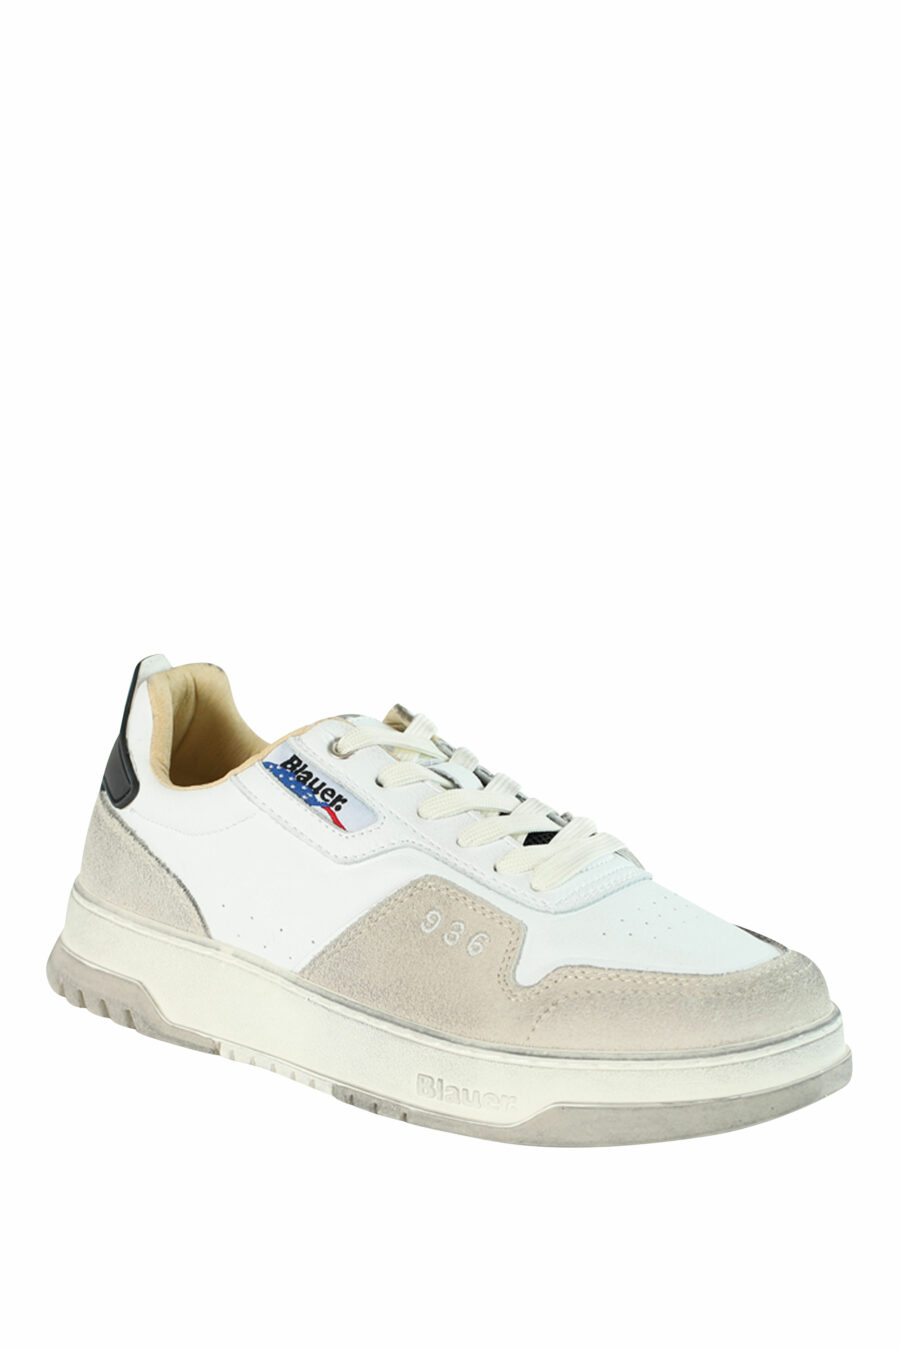 Trainers "HARPER" white mix with beige - 8058156494961 2